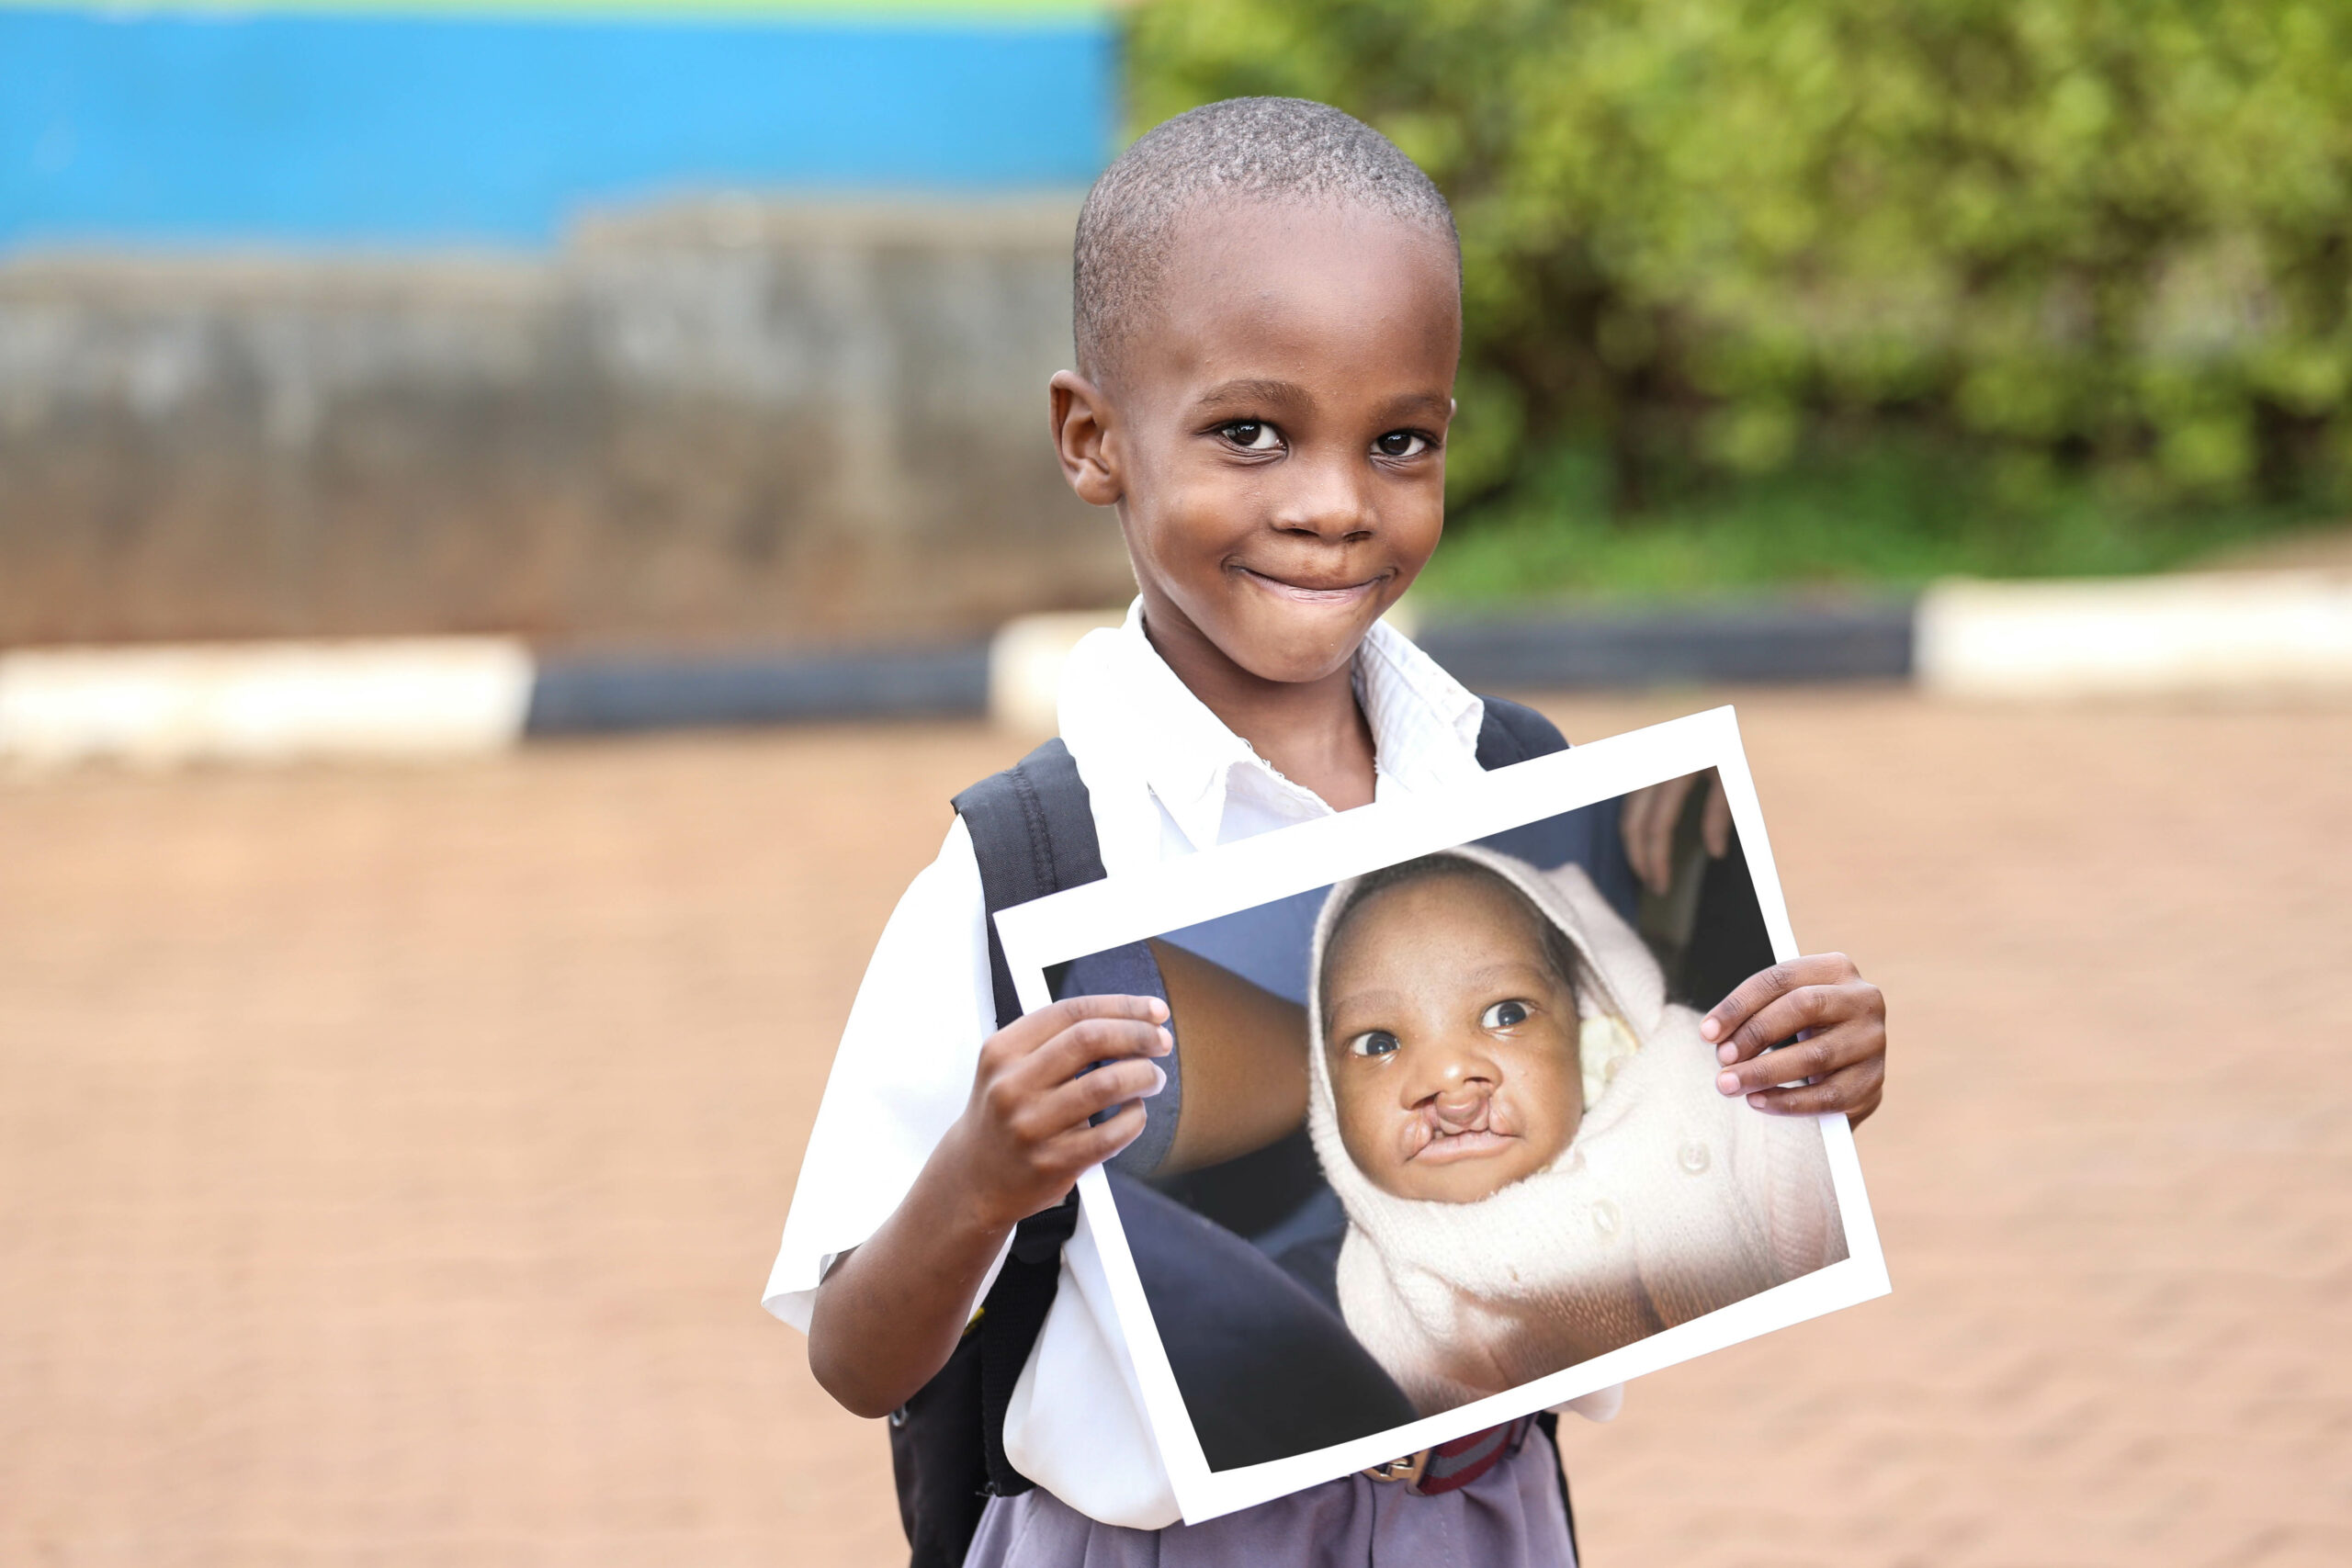 a little boy named livingstone standing outside and smiling as he holds a phot of himself as a baby back when he had a cleft